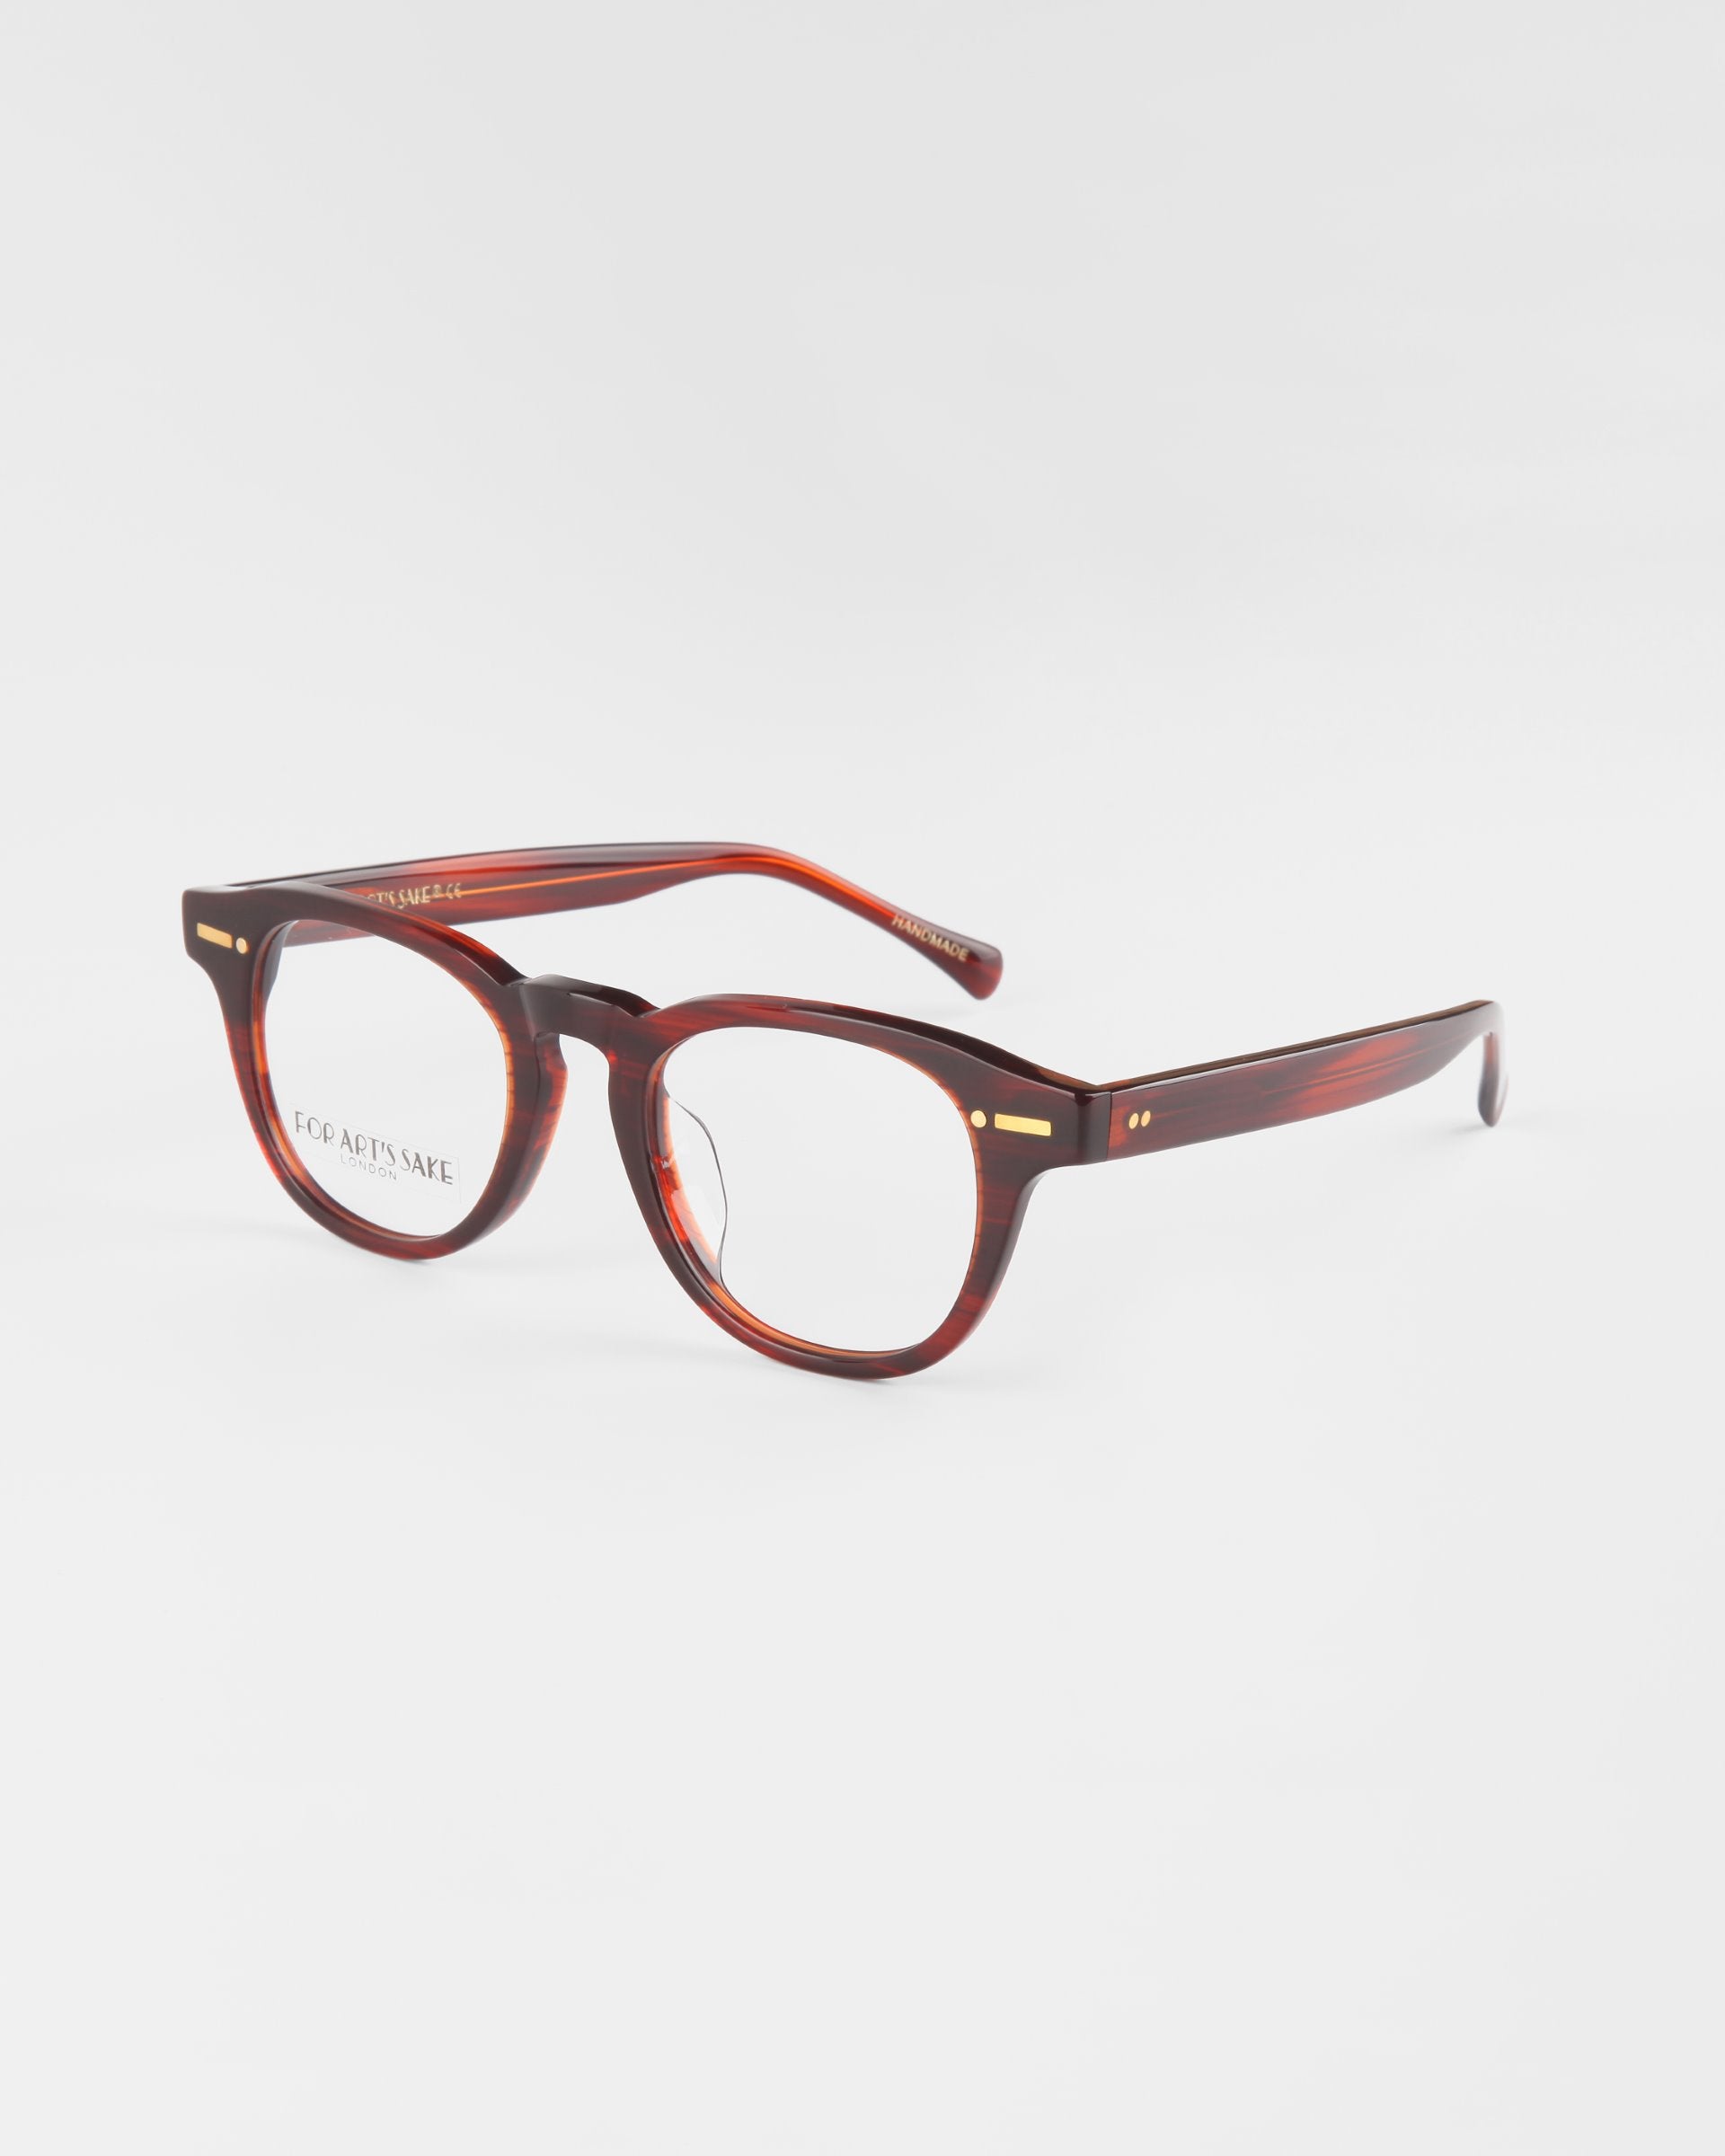 A pair of Rocky Brown eyeglasses by For Art&#39;s Sake® with round lenses and a sturdy bridge. The frames have gold accents near the hinges and a sleek, glossy finish. Featuring UV protection, the temple arms are thick and taper slightly towards the ear tips. Background is white.